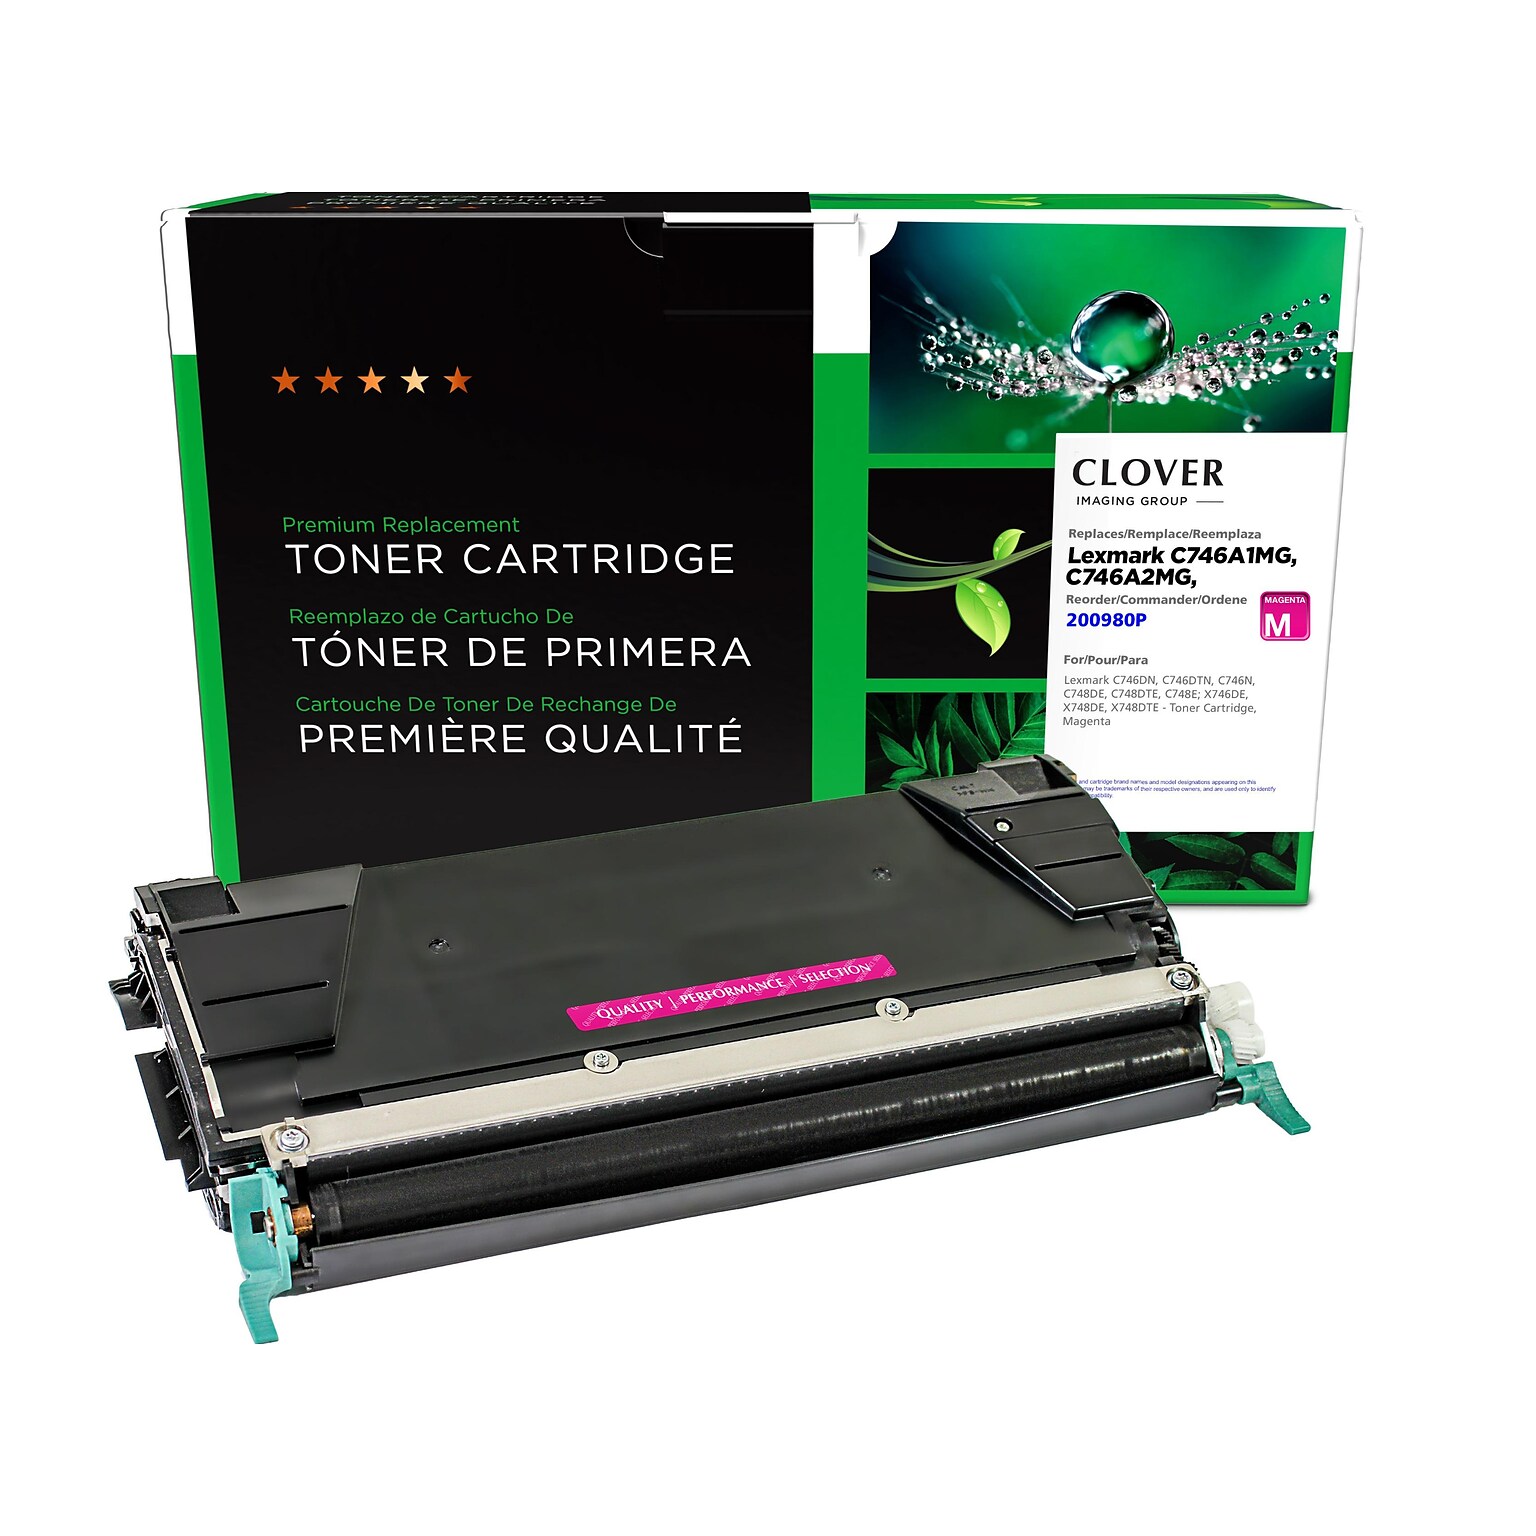 Clover Imaging Group Remanufactured Magenta Standard Yield Toner Cartridge Replacement for Lexmark C746/C748